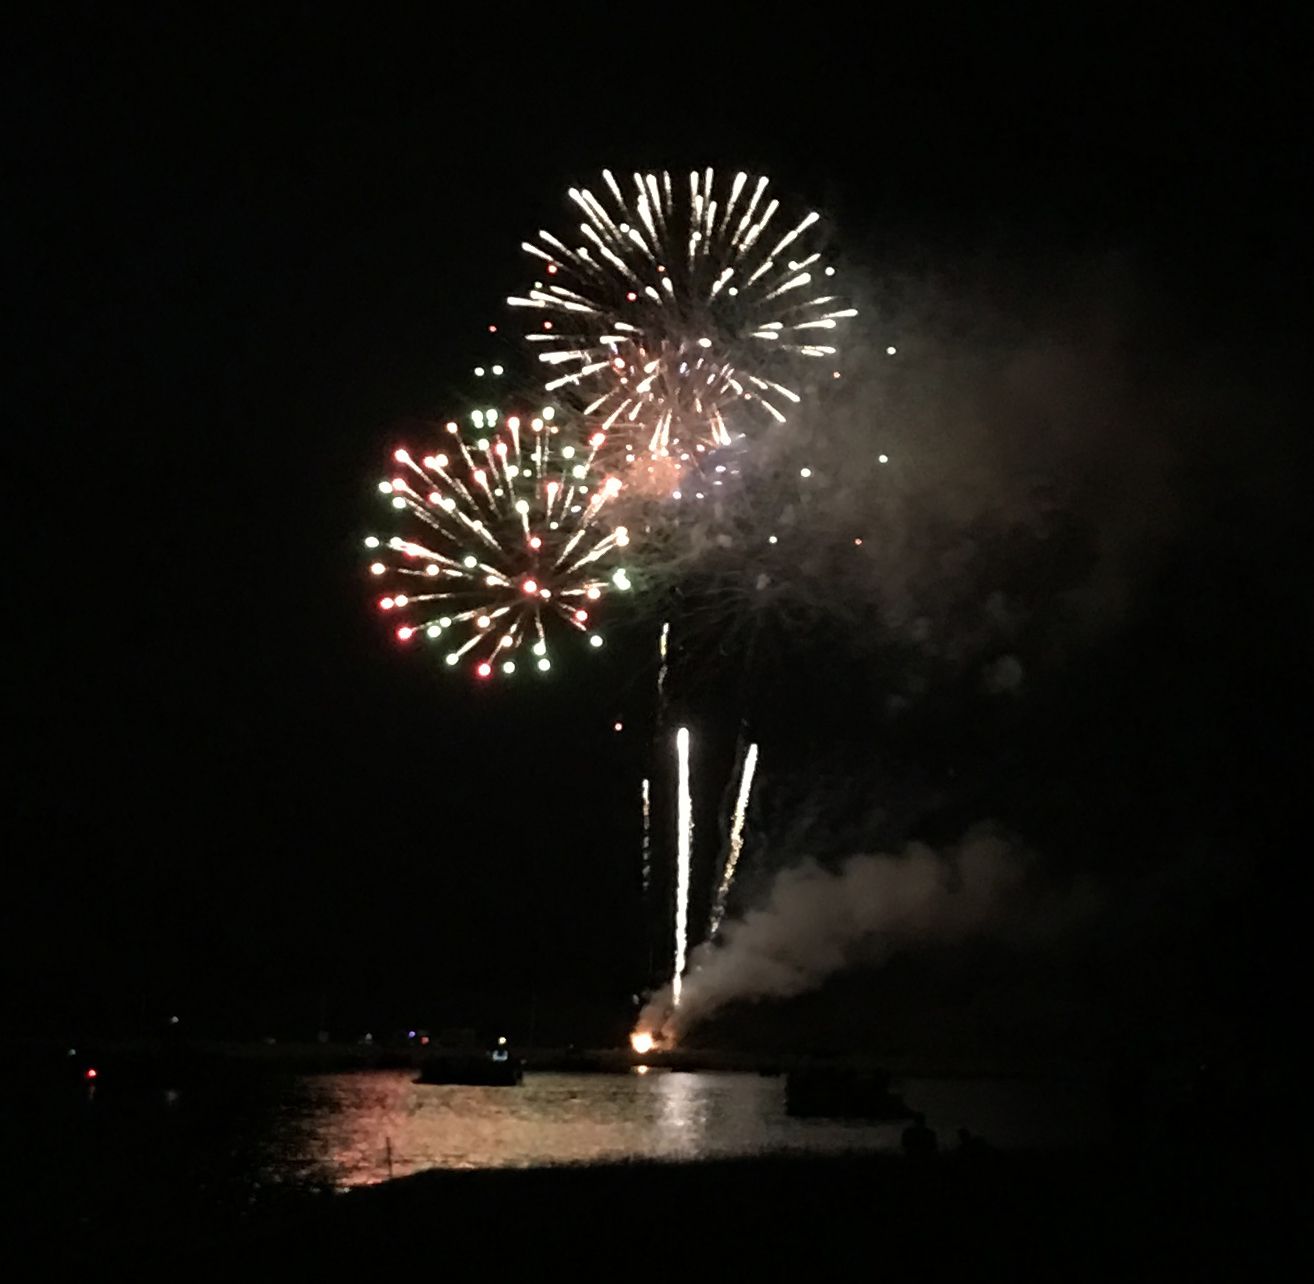 Fireworks over Garner Lake with boats in the foreground